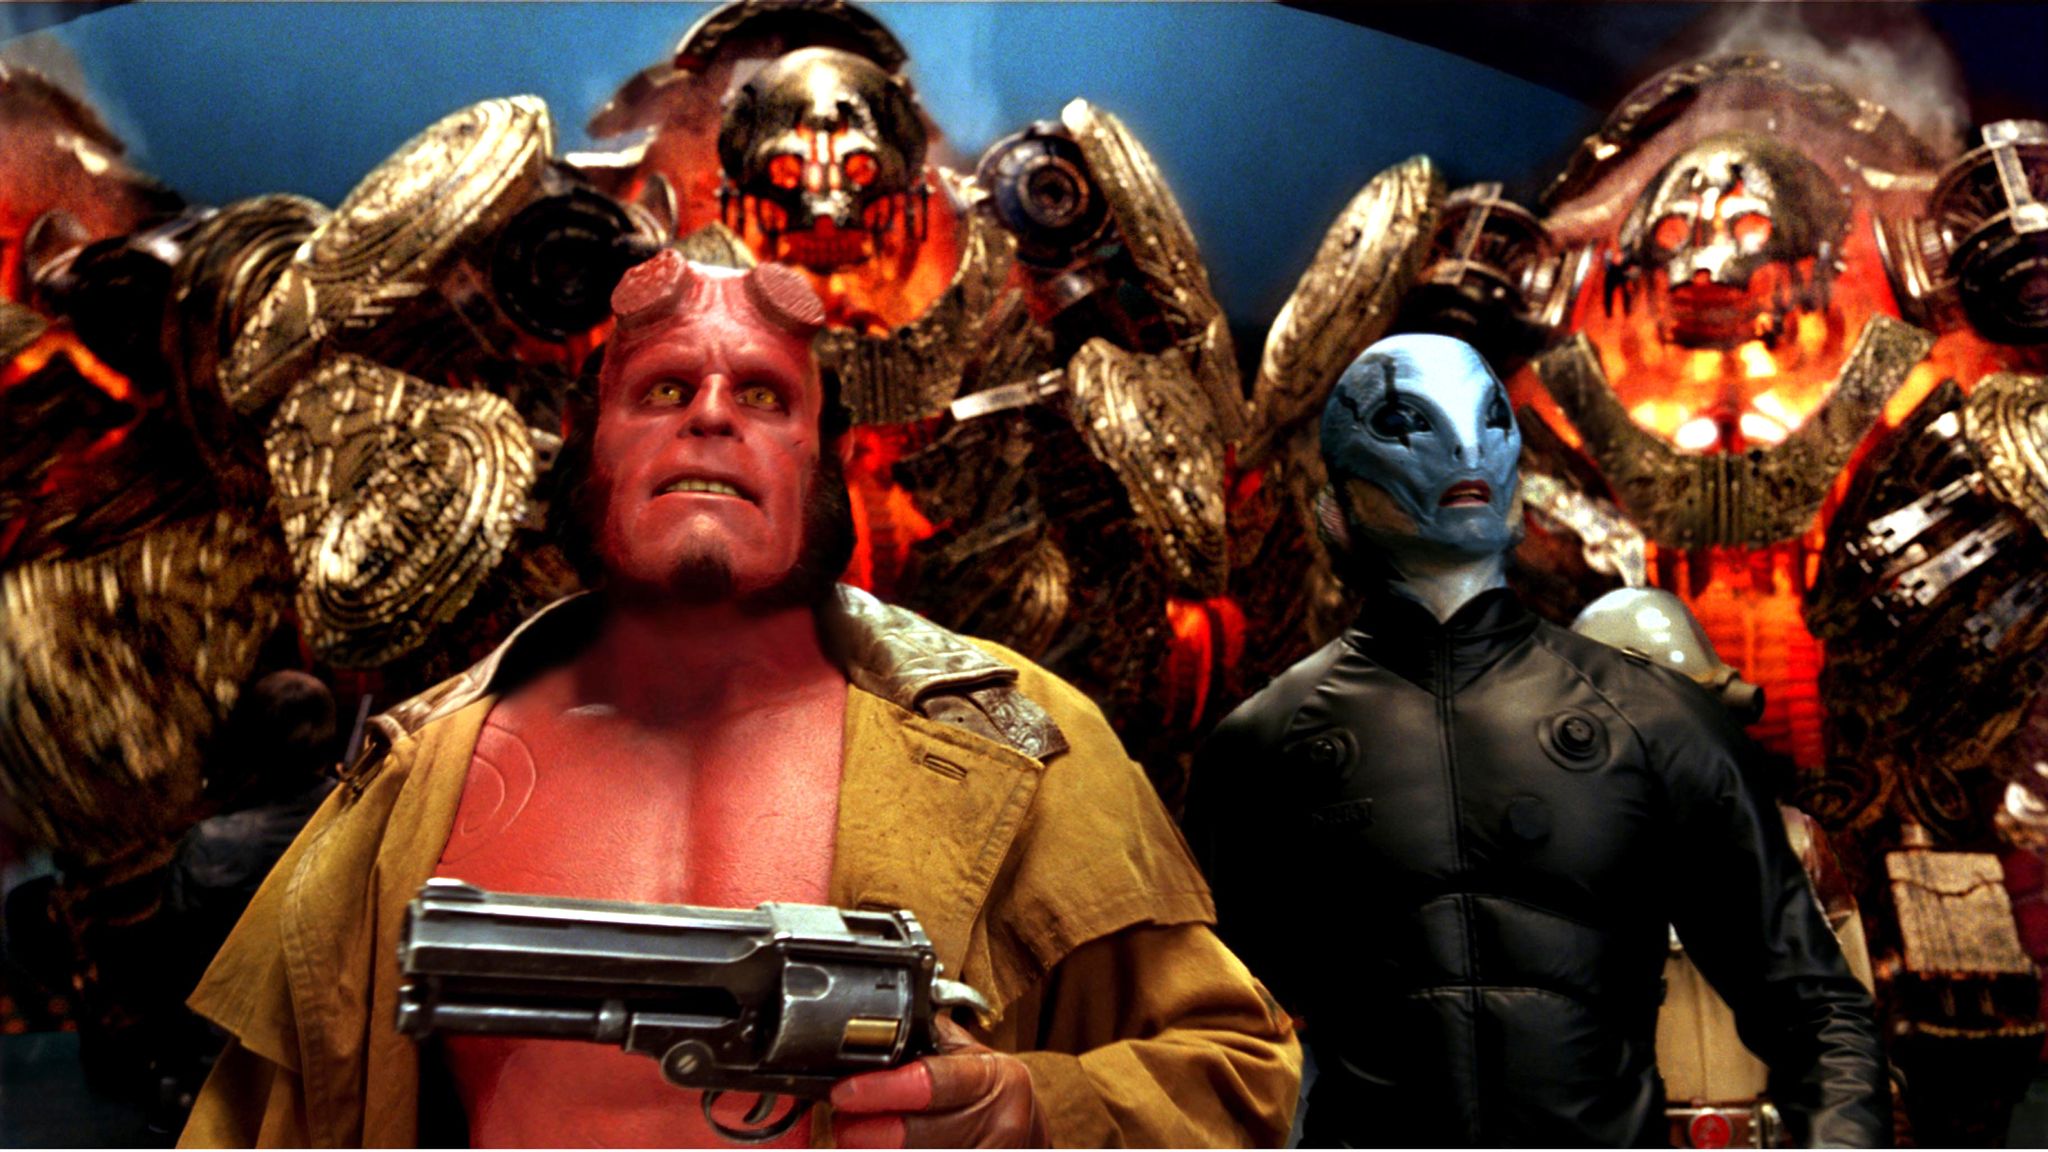 Download Hellboy 3 Sequel Planned With New Actor And Director Ents Arts News Sky News